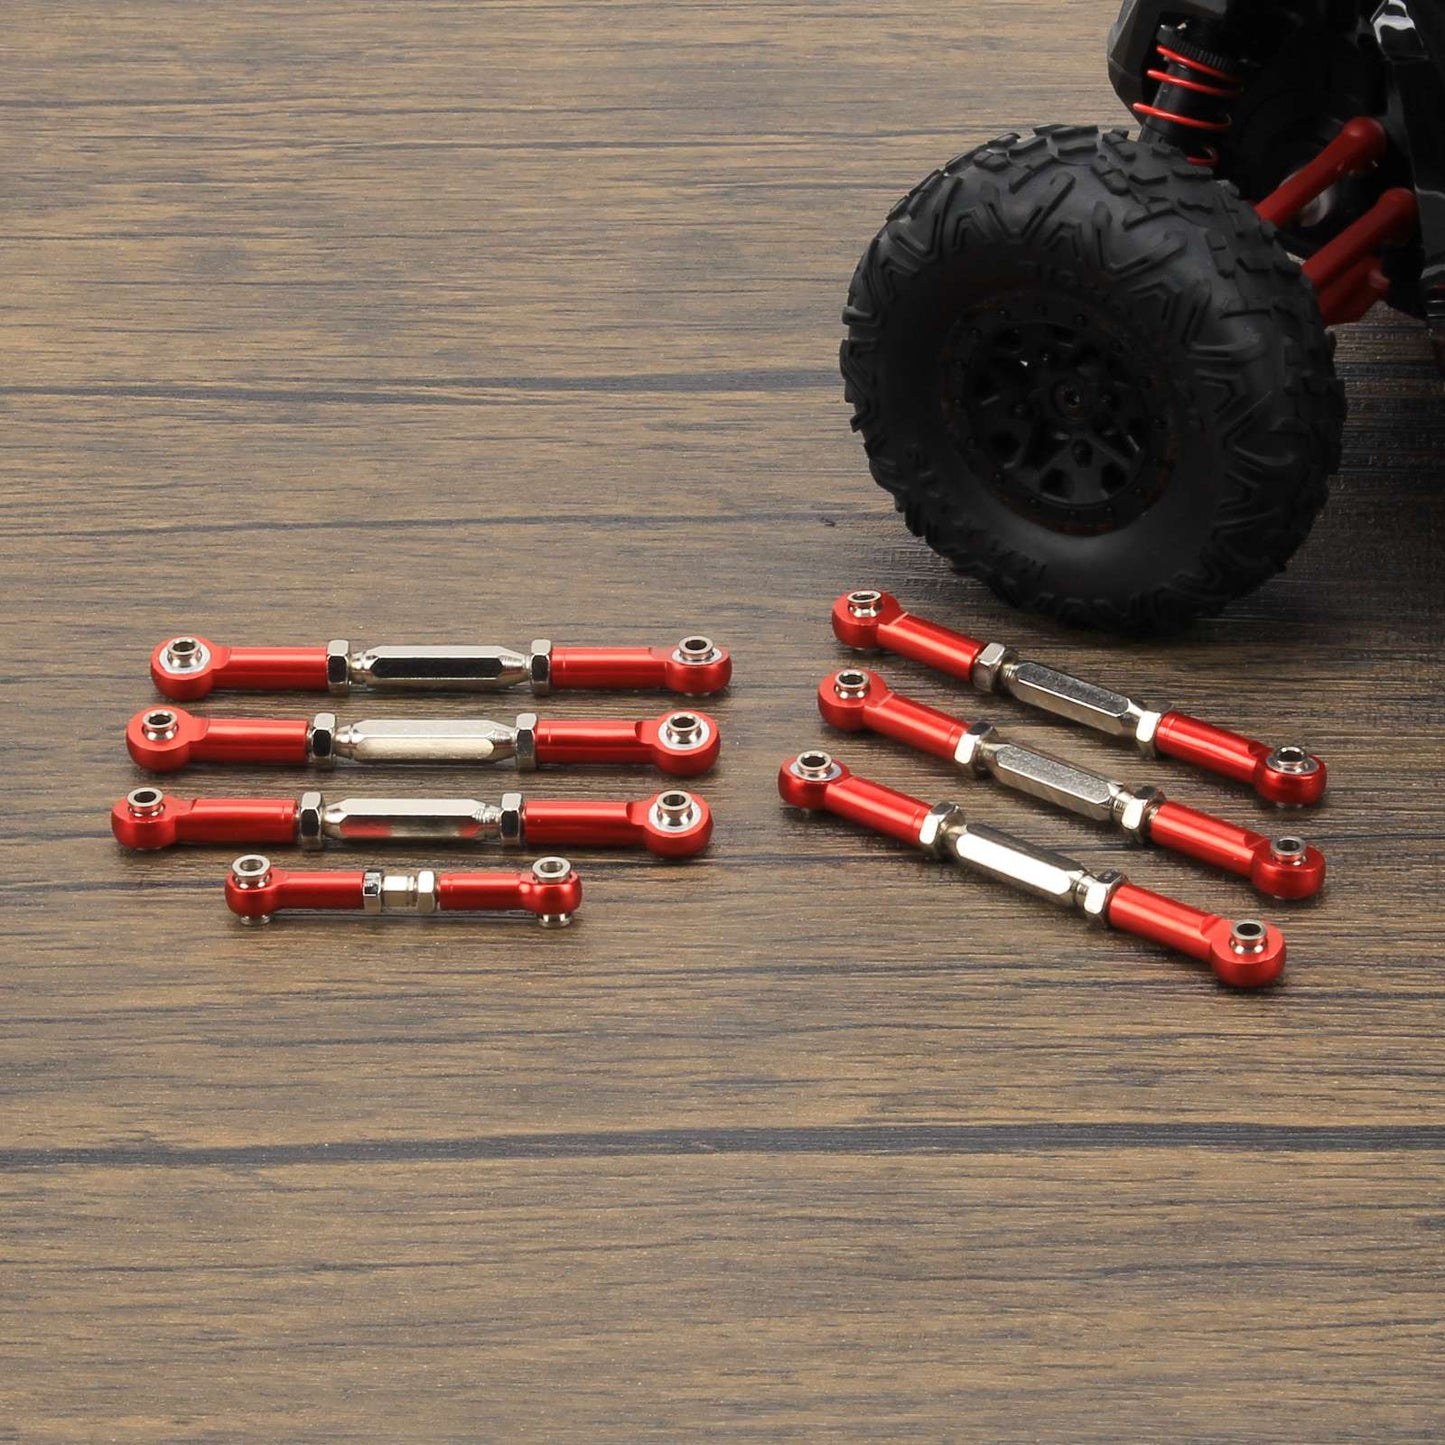 RCAWD HPI Venture Toyota FJ Cruiser crawler RCAWD RC Steering Link Set 7pcs for 1/10 Traxxas Slash 4wd Upgrades